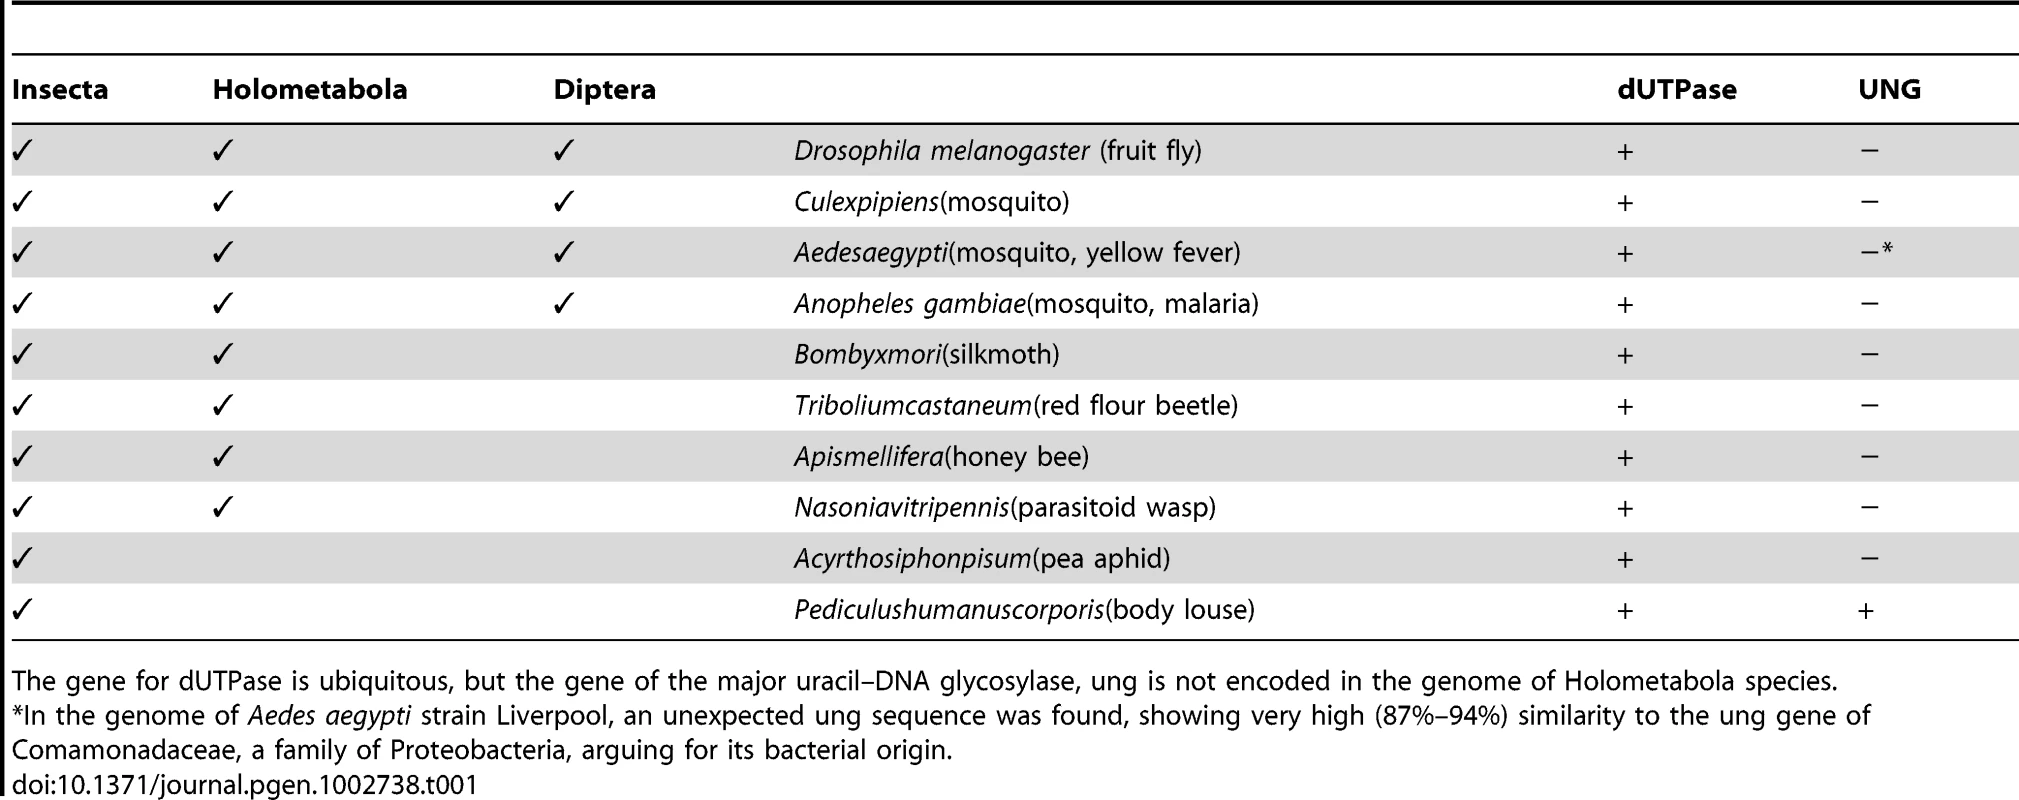 Occurrence of genes encoding dUTPase and UNG in different insects.